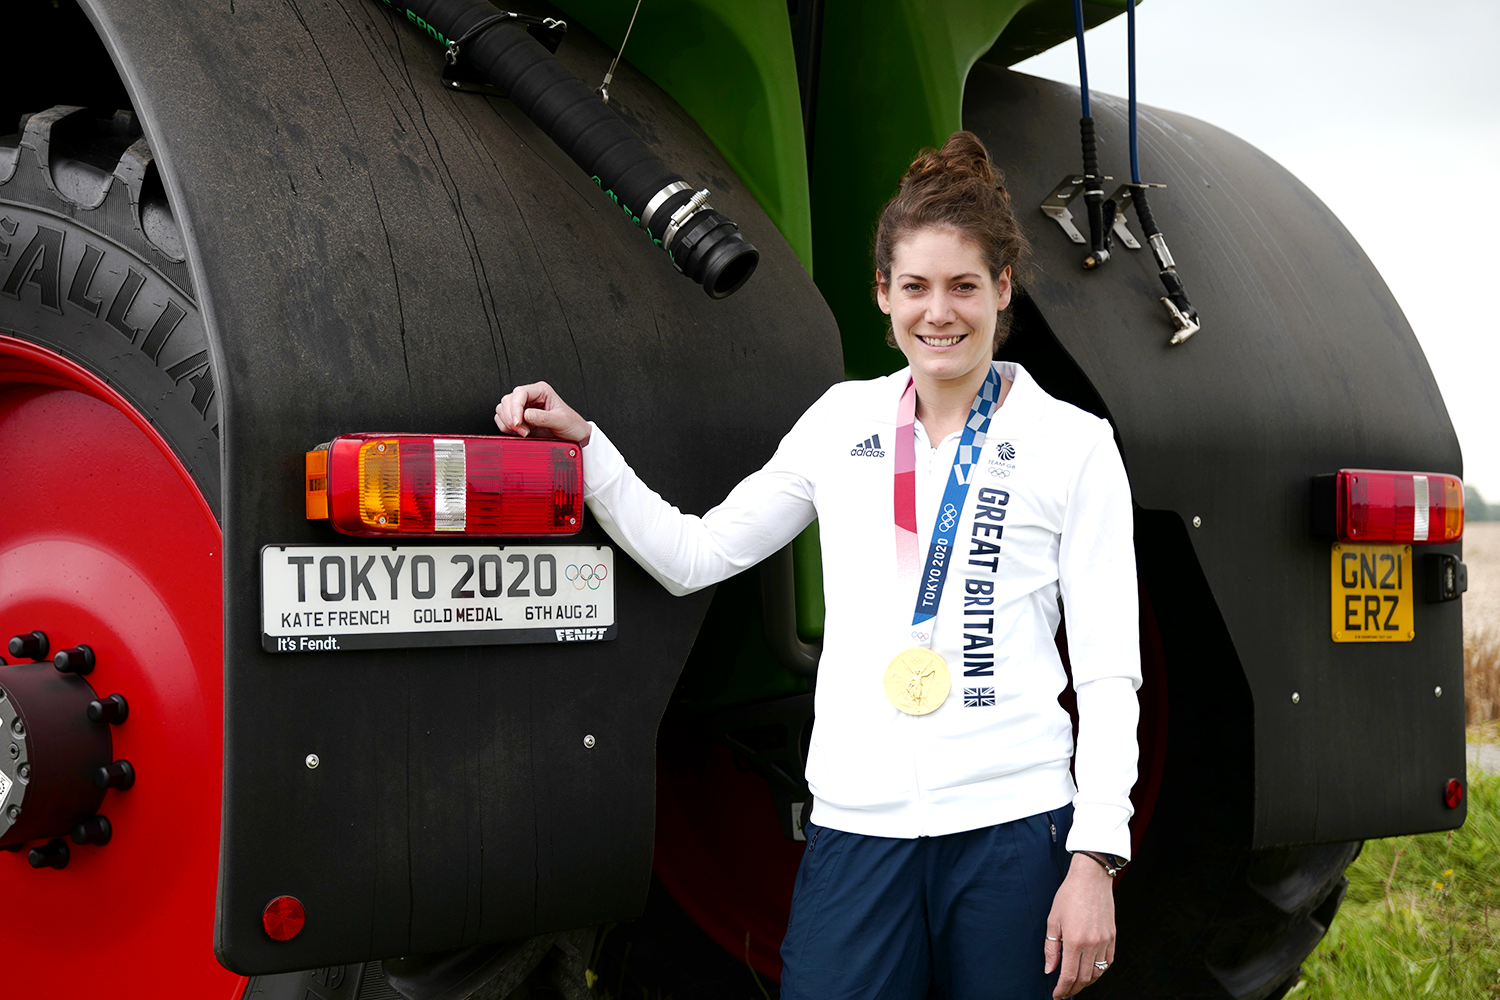 Olympic Gold commemorated by new farm sprayer